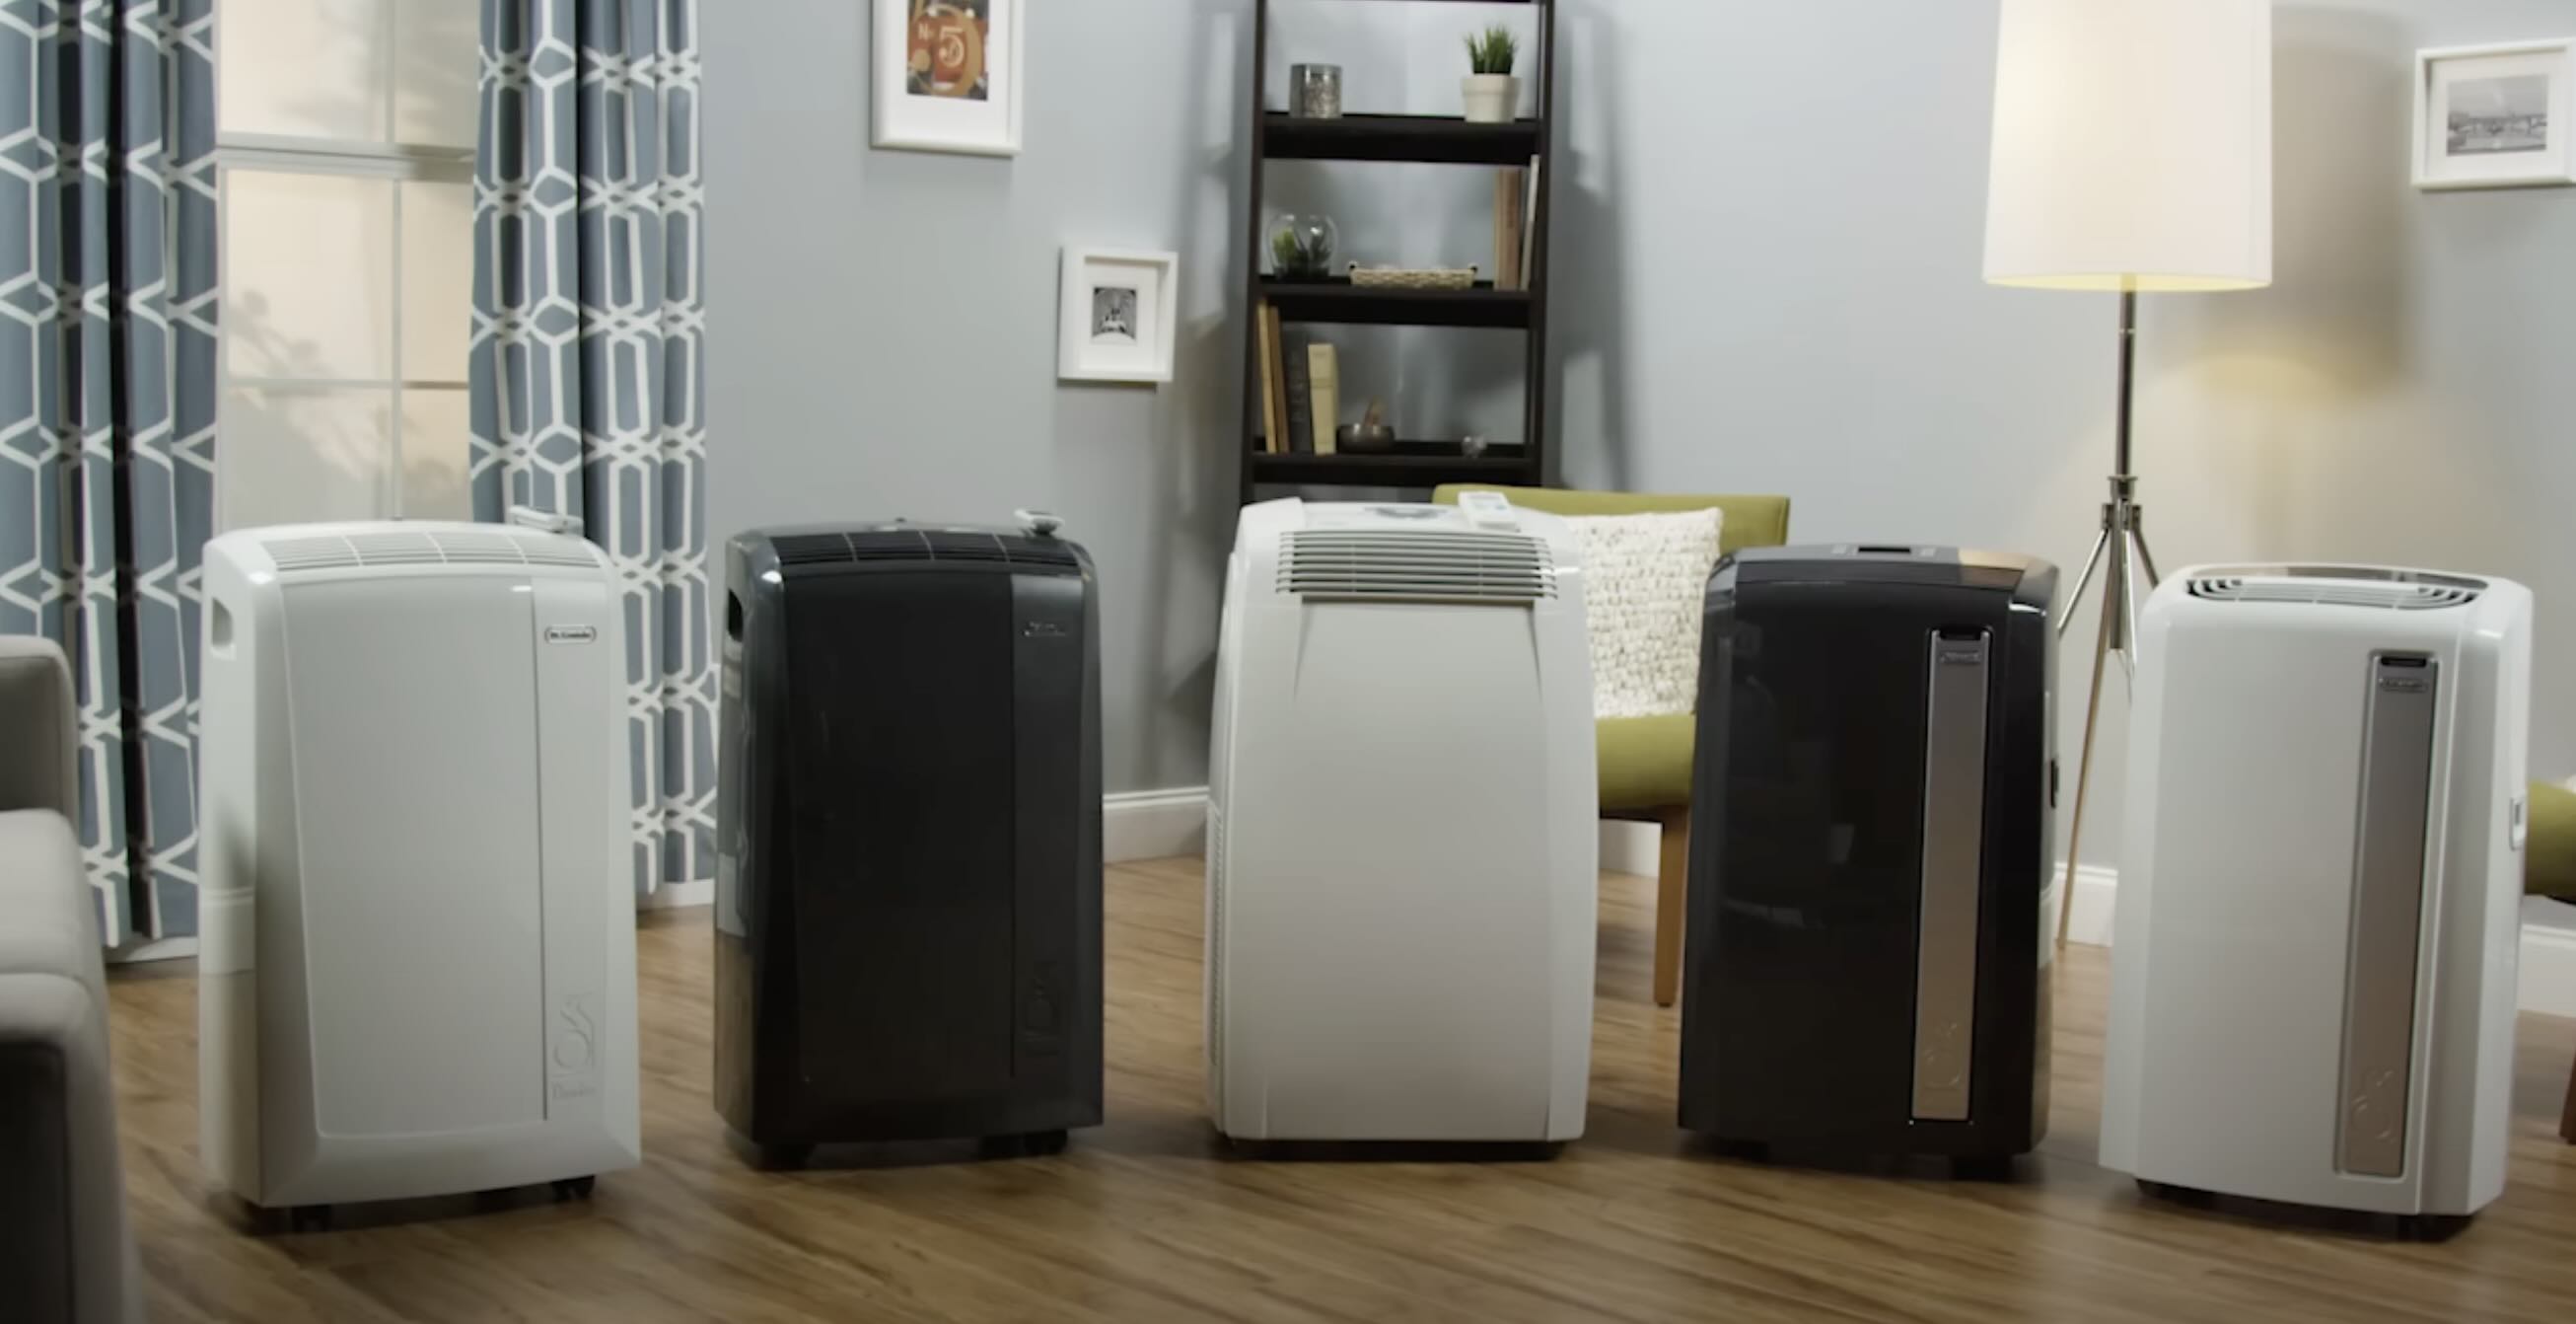 How To Drain A DeLonghi Portable Air Conditioner